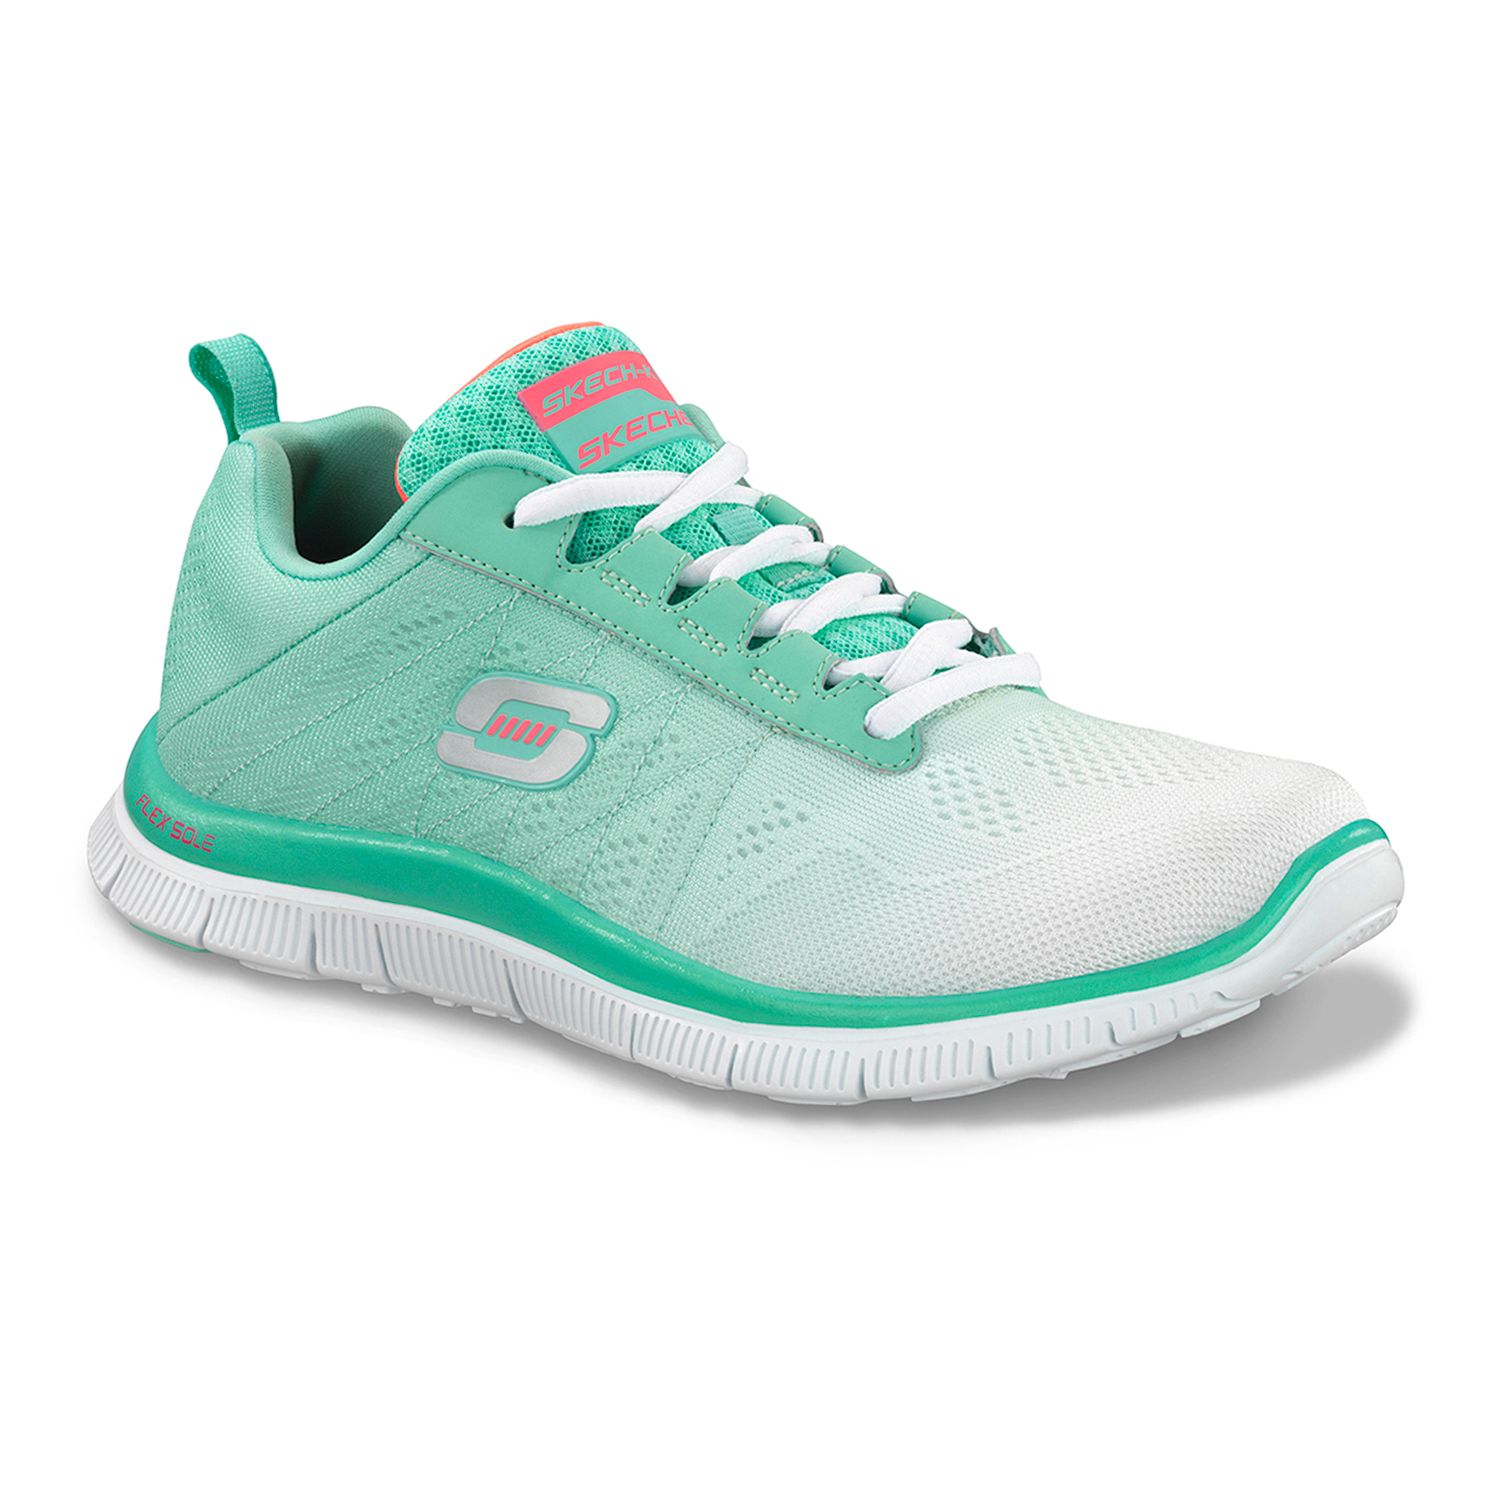 skechers tennis shoes at kohl's